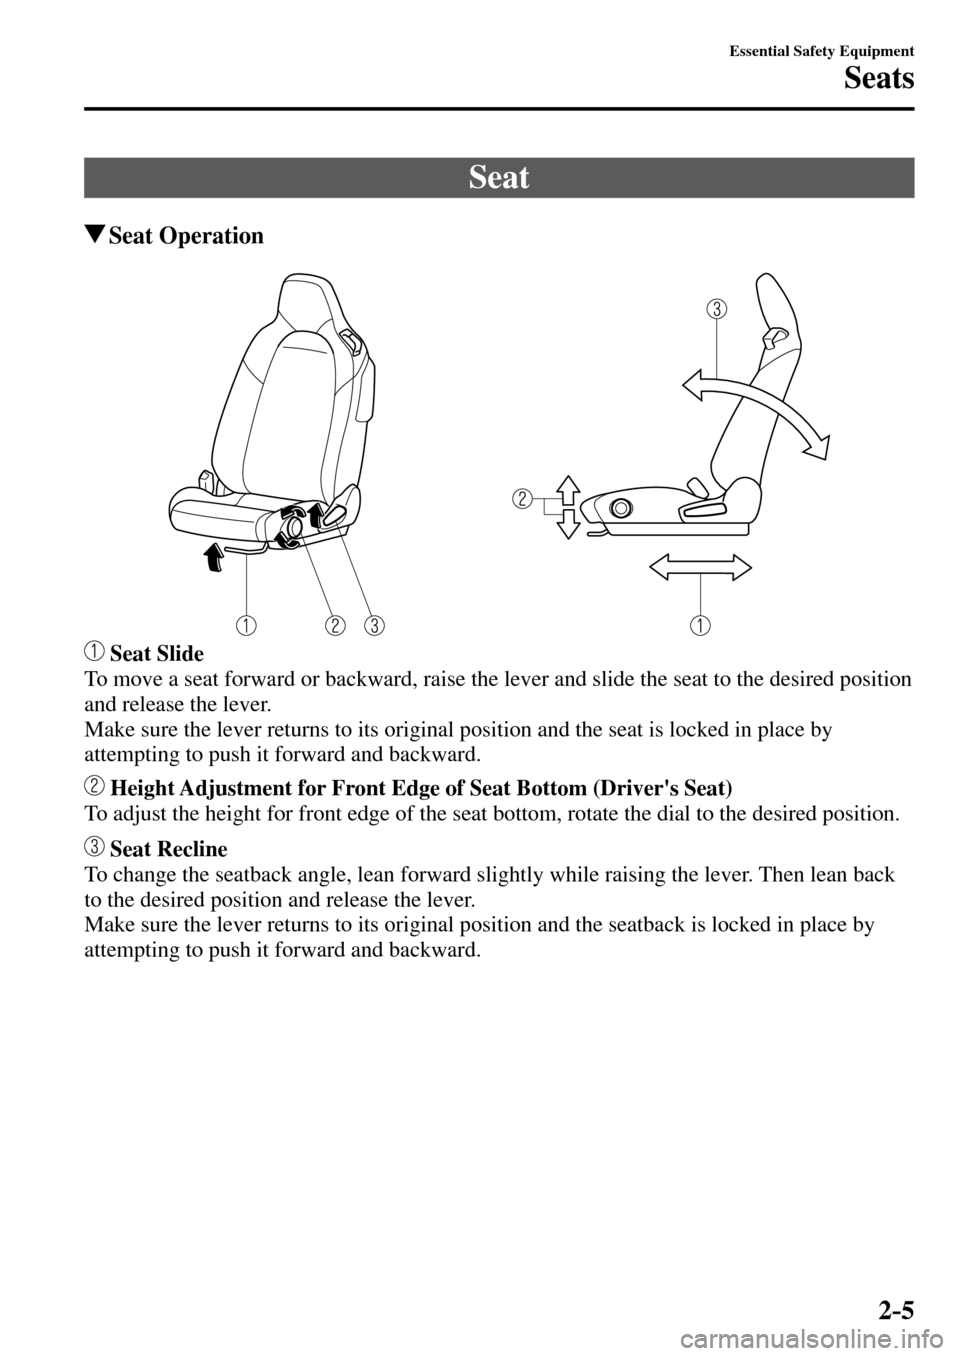 MAZDA MODEL MX-5 RF 2017  Owners Manual (in English) 2–5
Essential Safety Equipment
Seats
 Seat
 Seat  Operation
 Seat Slide
  To move a seat forward or backward, raise the lever and slide the seat to the desired position 
and release the lever.
  Mak